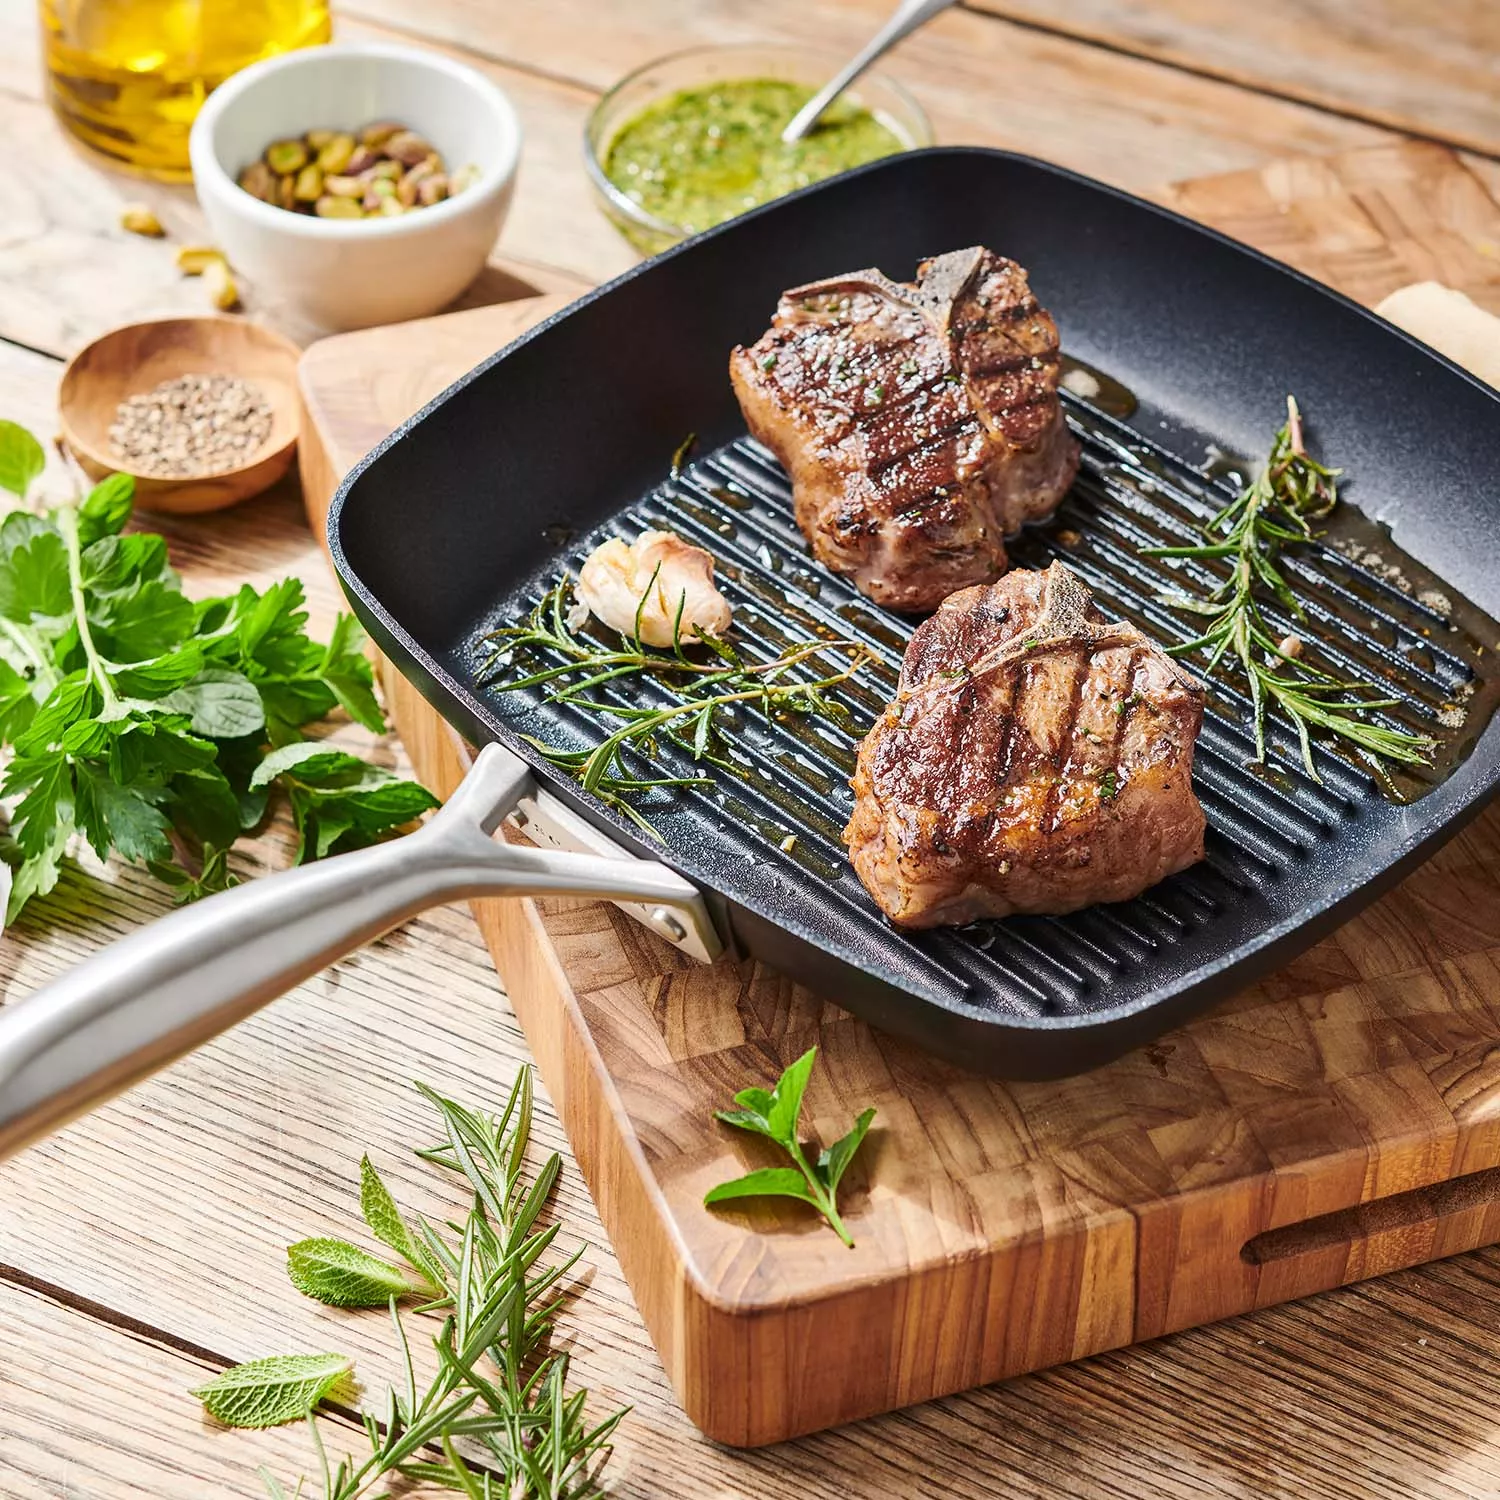 Zyliss Ultimate Pro Grill Pan | 10